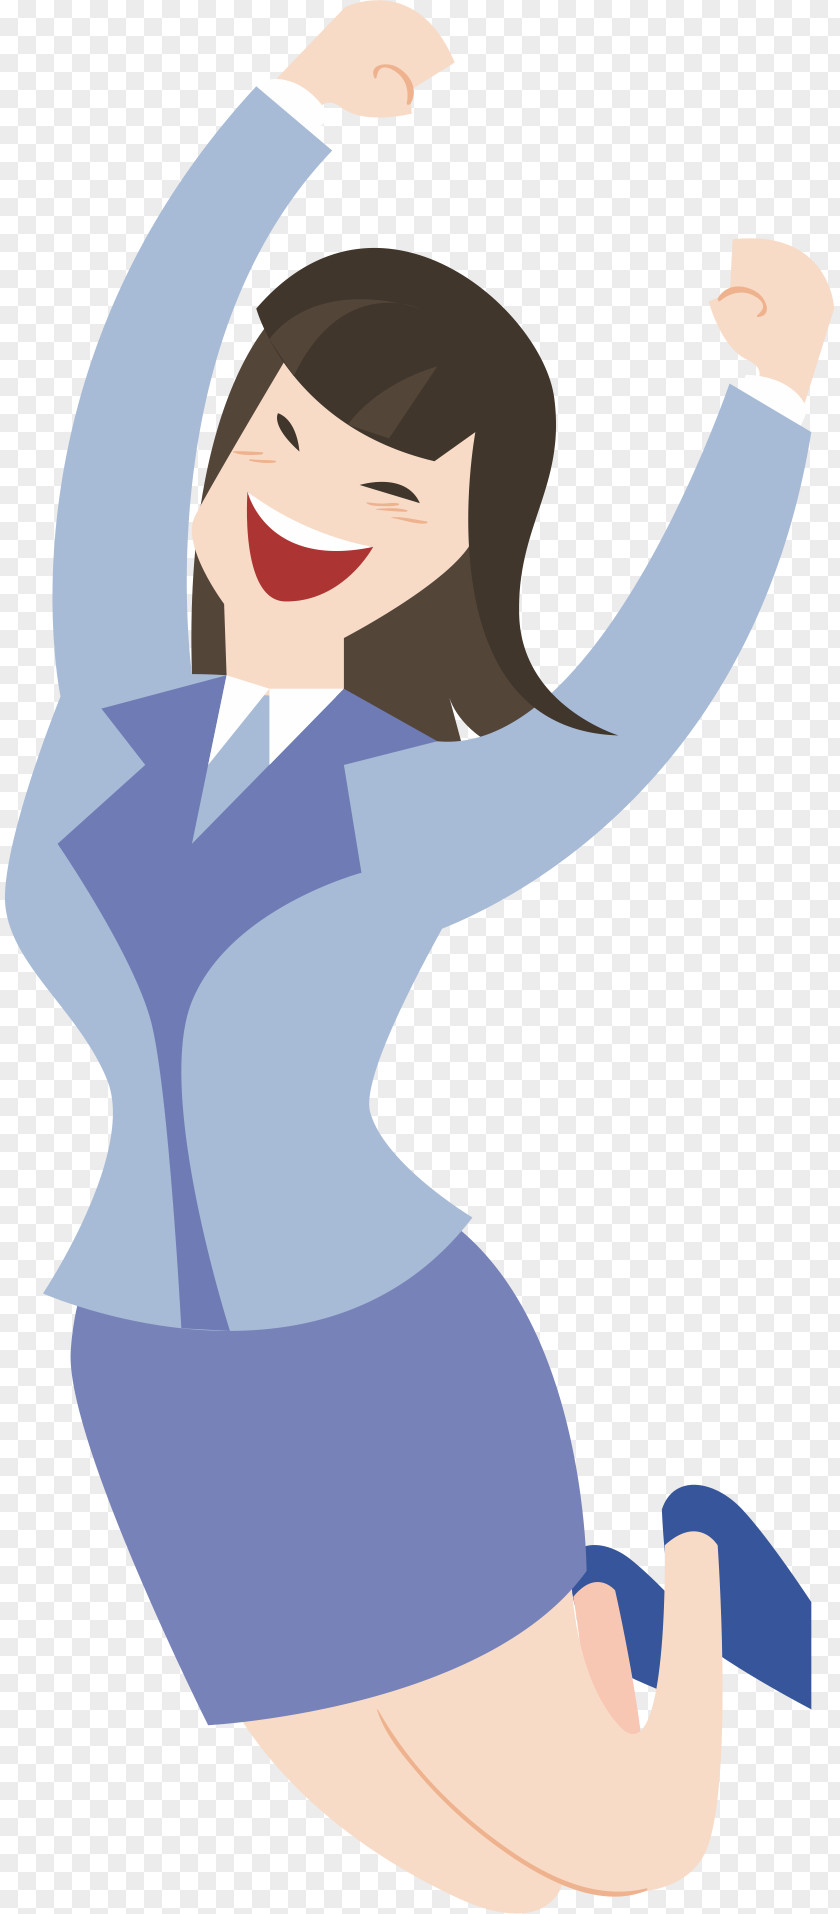 Happy People Workplace Business Human Factors And Ergonomics Organization Clip Art PNG